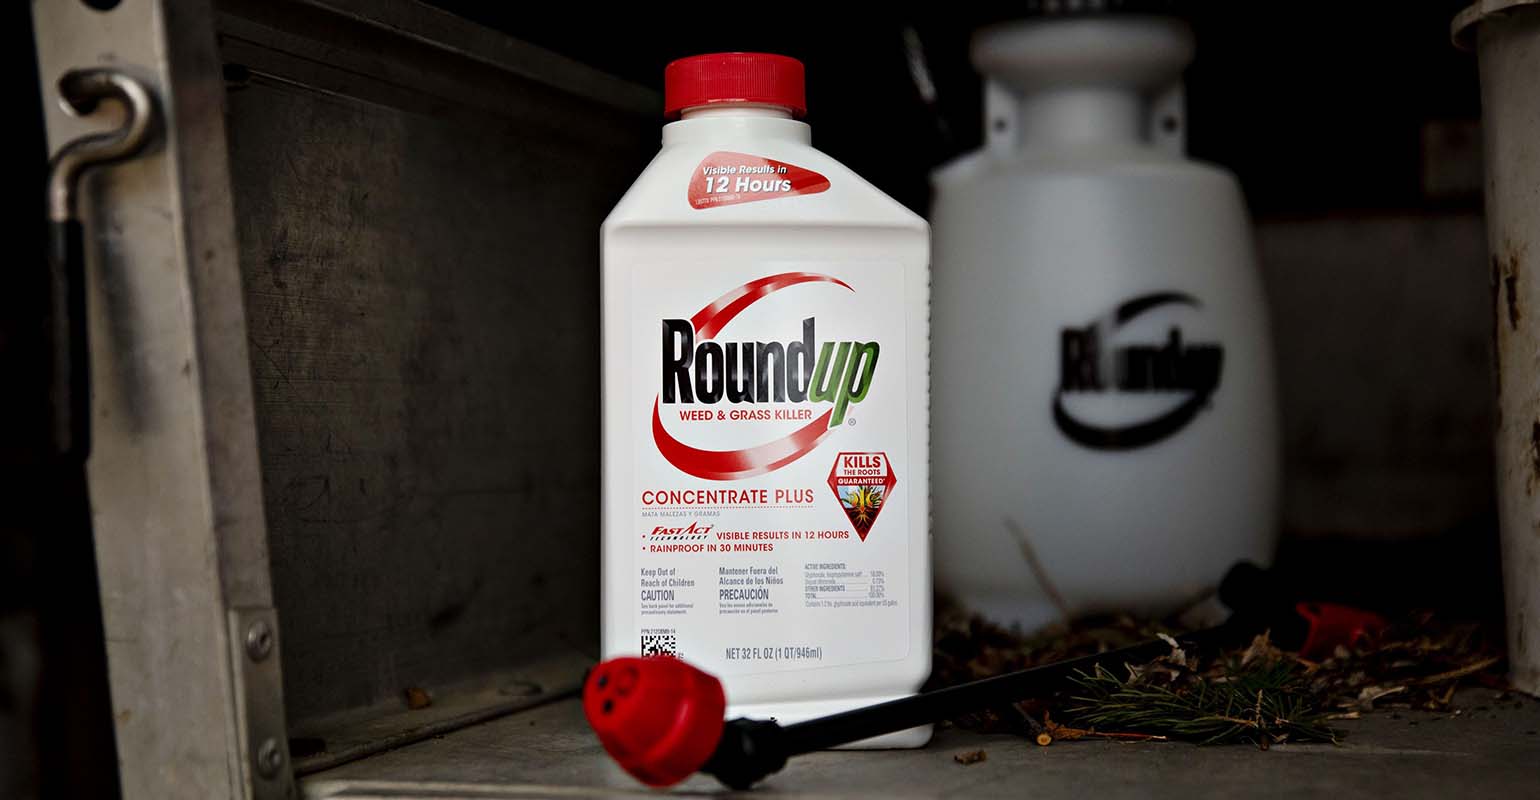 Bayer to replace glyphosate from US lawn products by 2023 - EHN